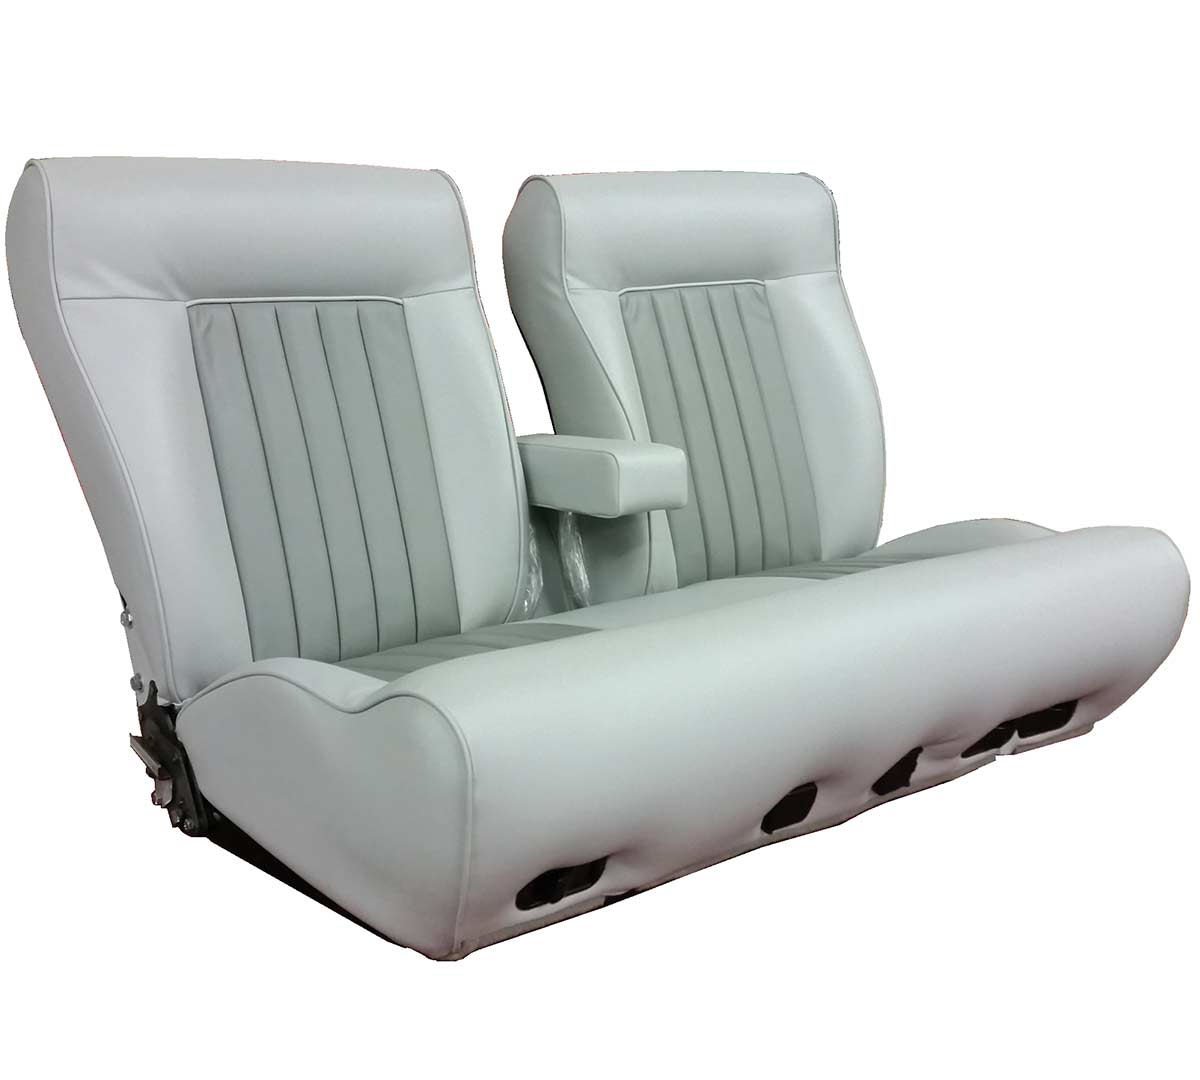 upholstered front bench seats Bucket Style 1